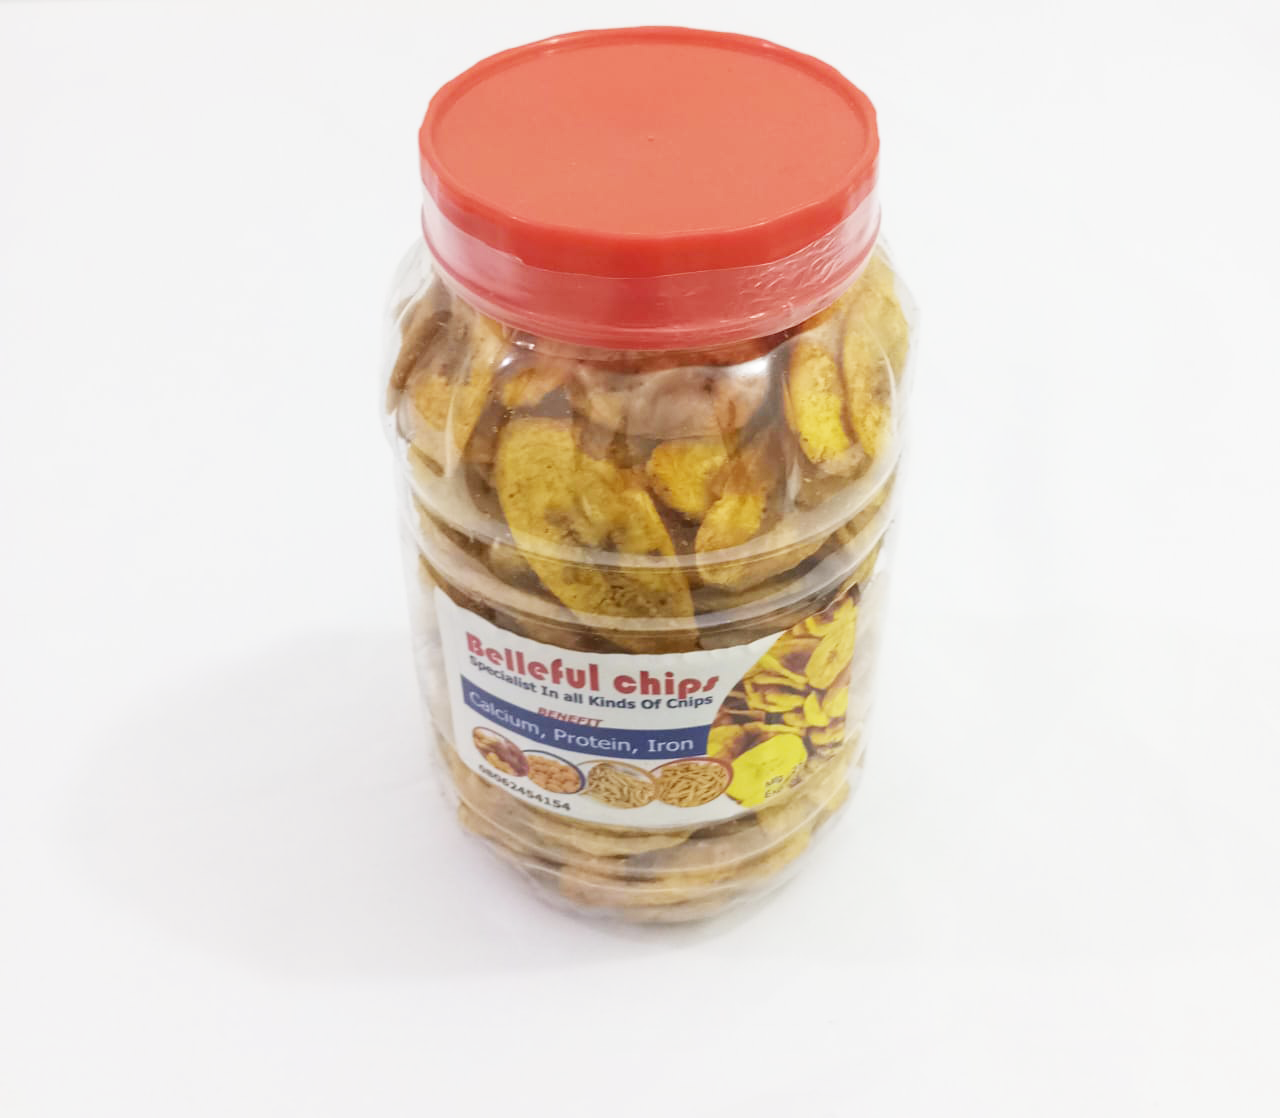 Belleful Chips Specialist Plaintain Chips, |GMP31a